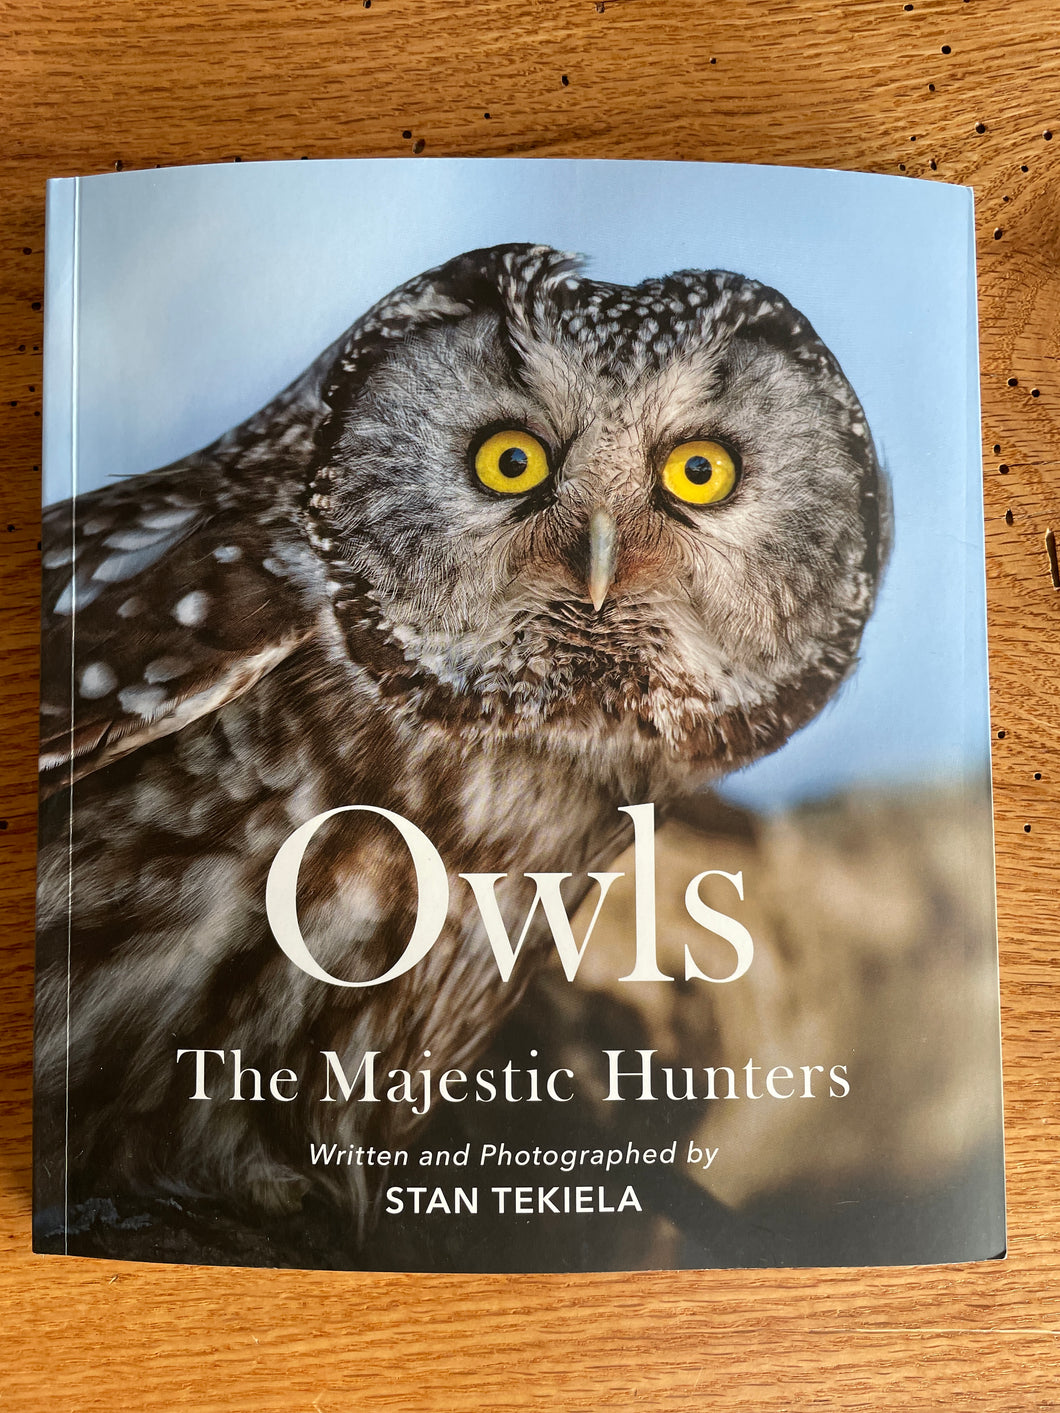 Book- Owls: The Majestic Hunters